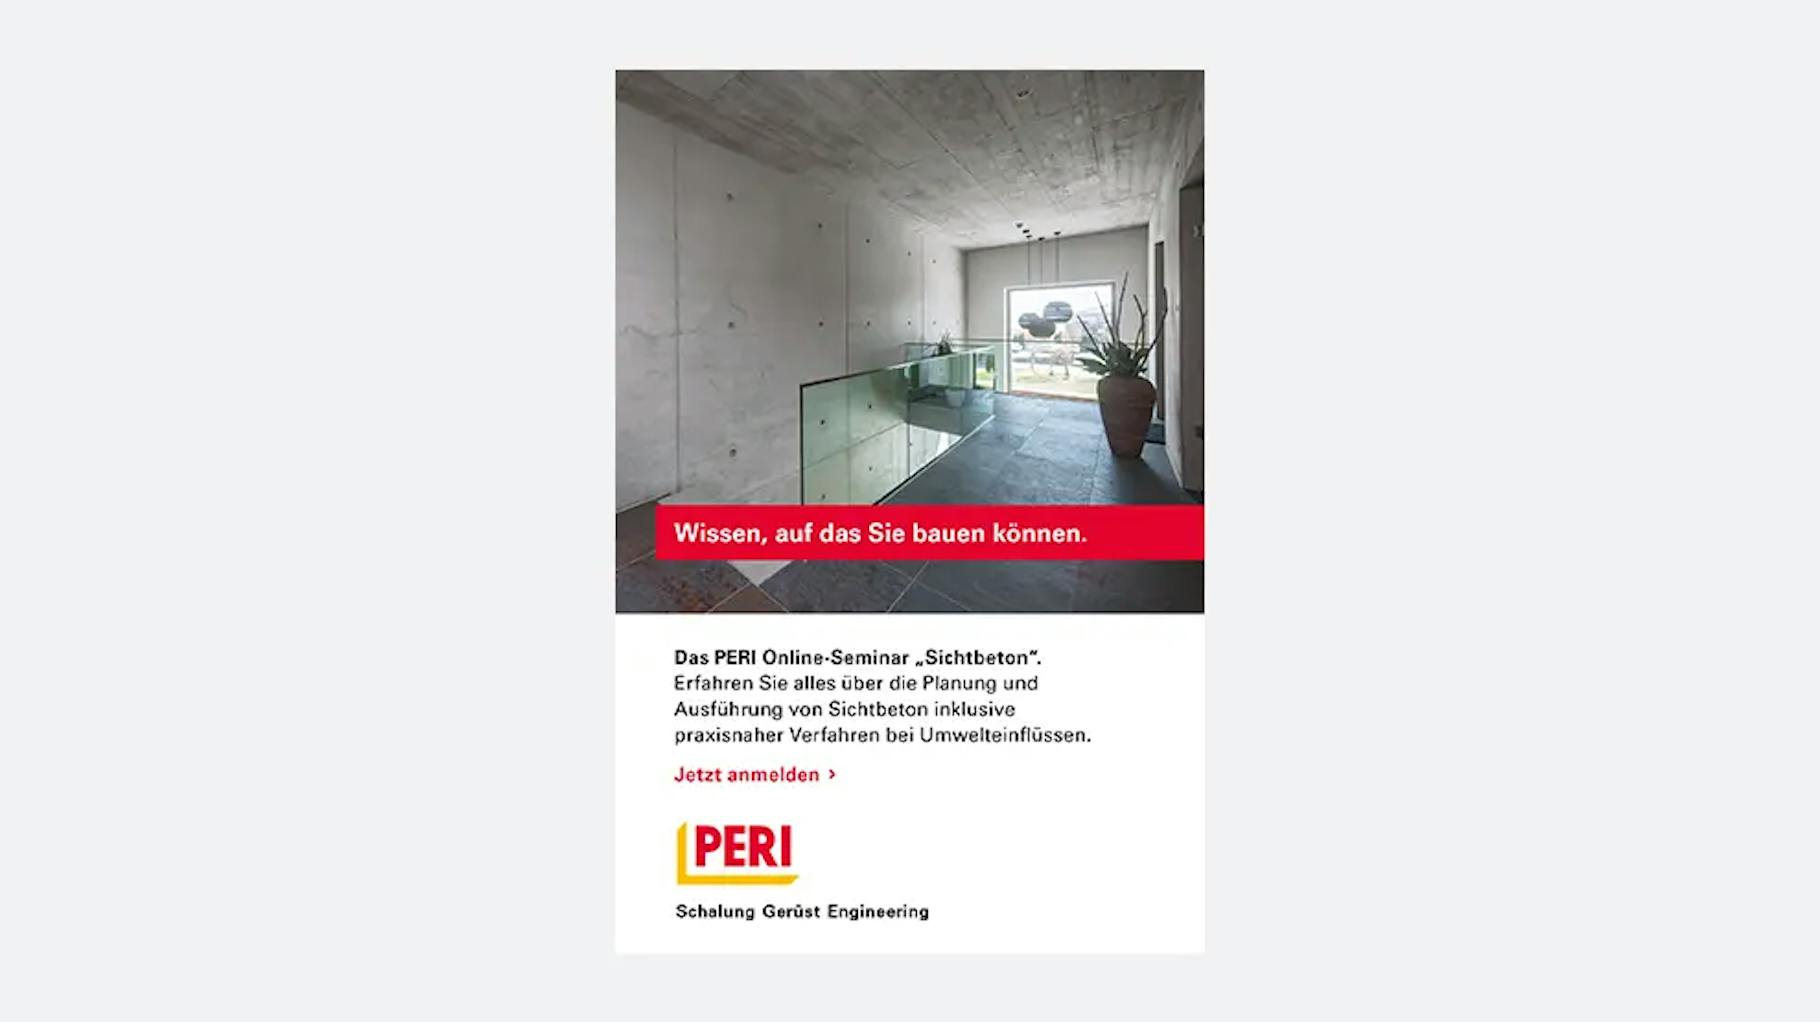 PERI national advertisement for an online seminar "Exposed Concrete